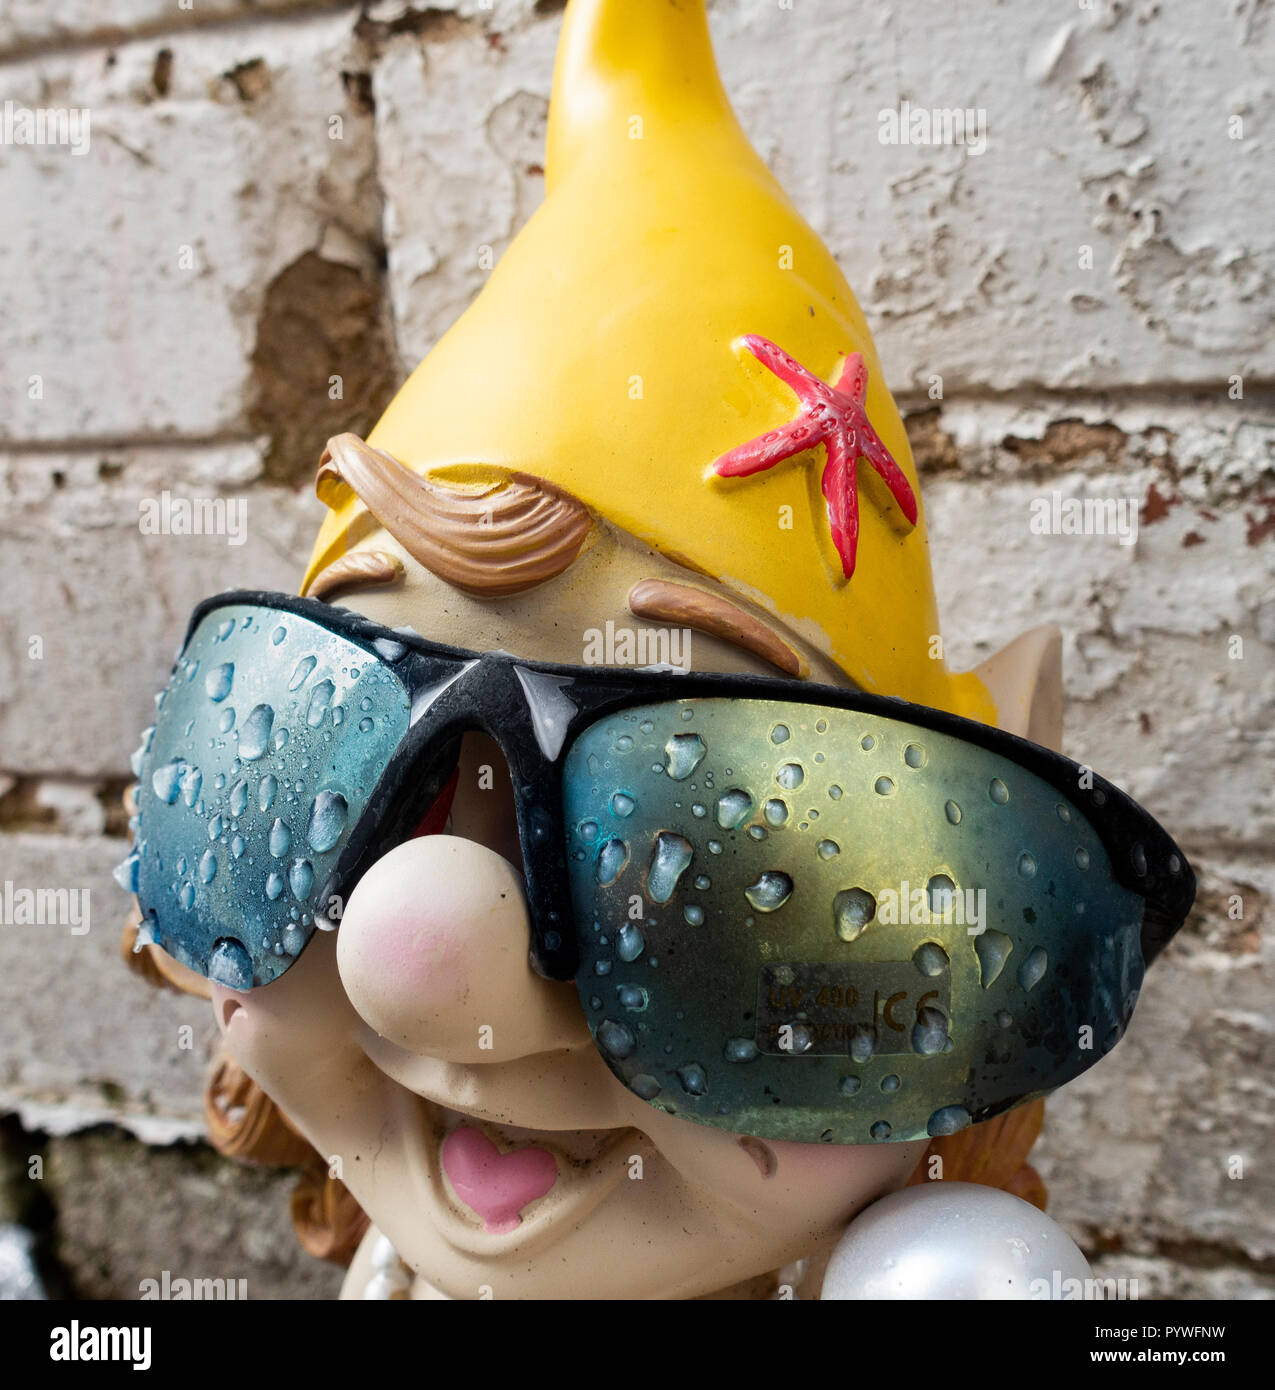 Seaton Carew, County Durham, England, United Kingdom. 31st Oct, 2018. Weather: Overnight rain freezes on sunglasses on garden gnome in garden near Seaton Carew on a frosty Wednesday morning in the north east of England. Credit: ALAN DAWSON/Alamy Live News Stock Photo